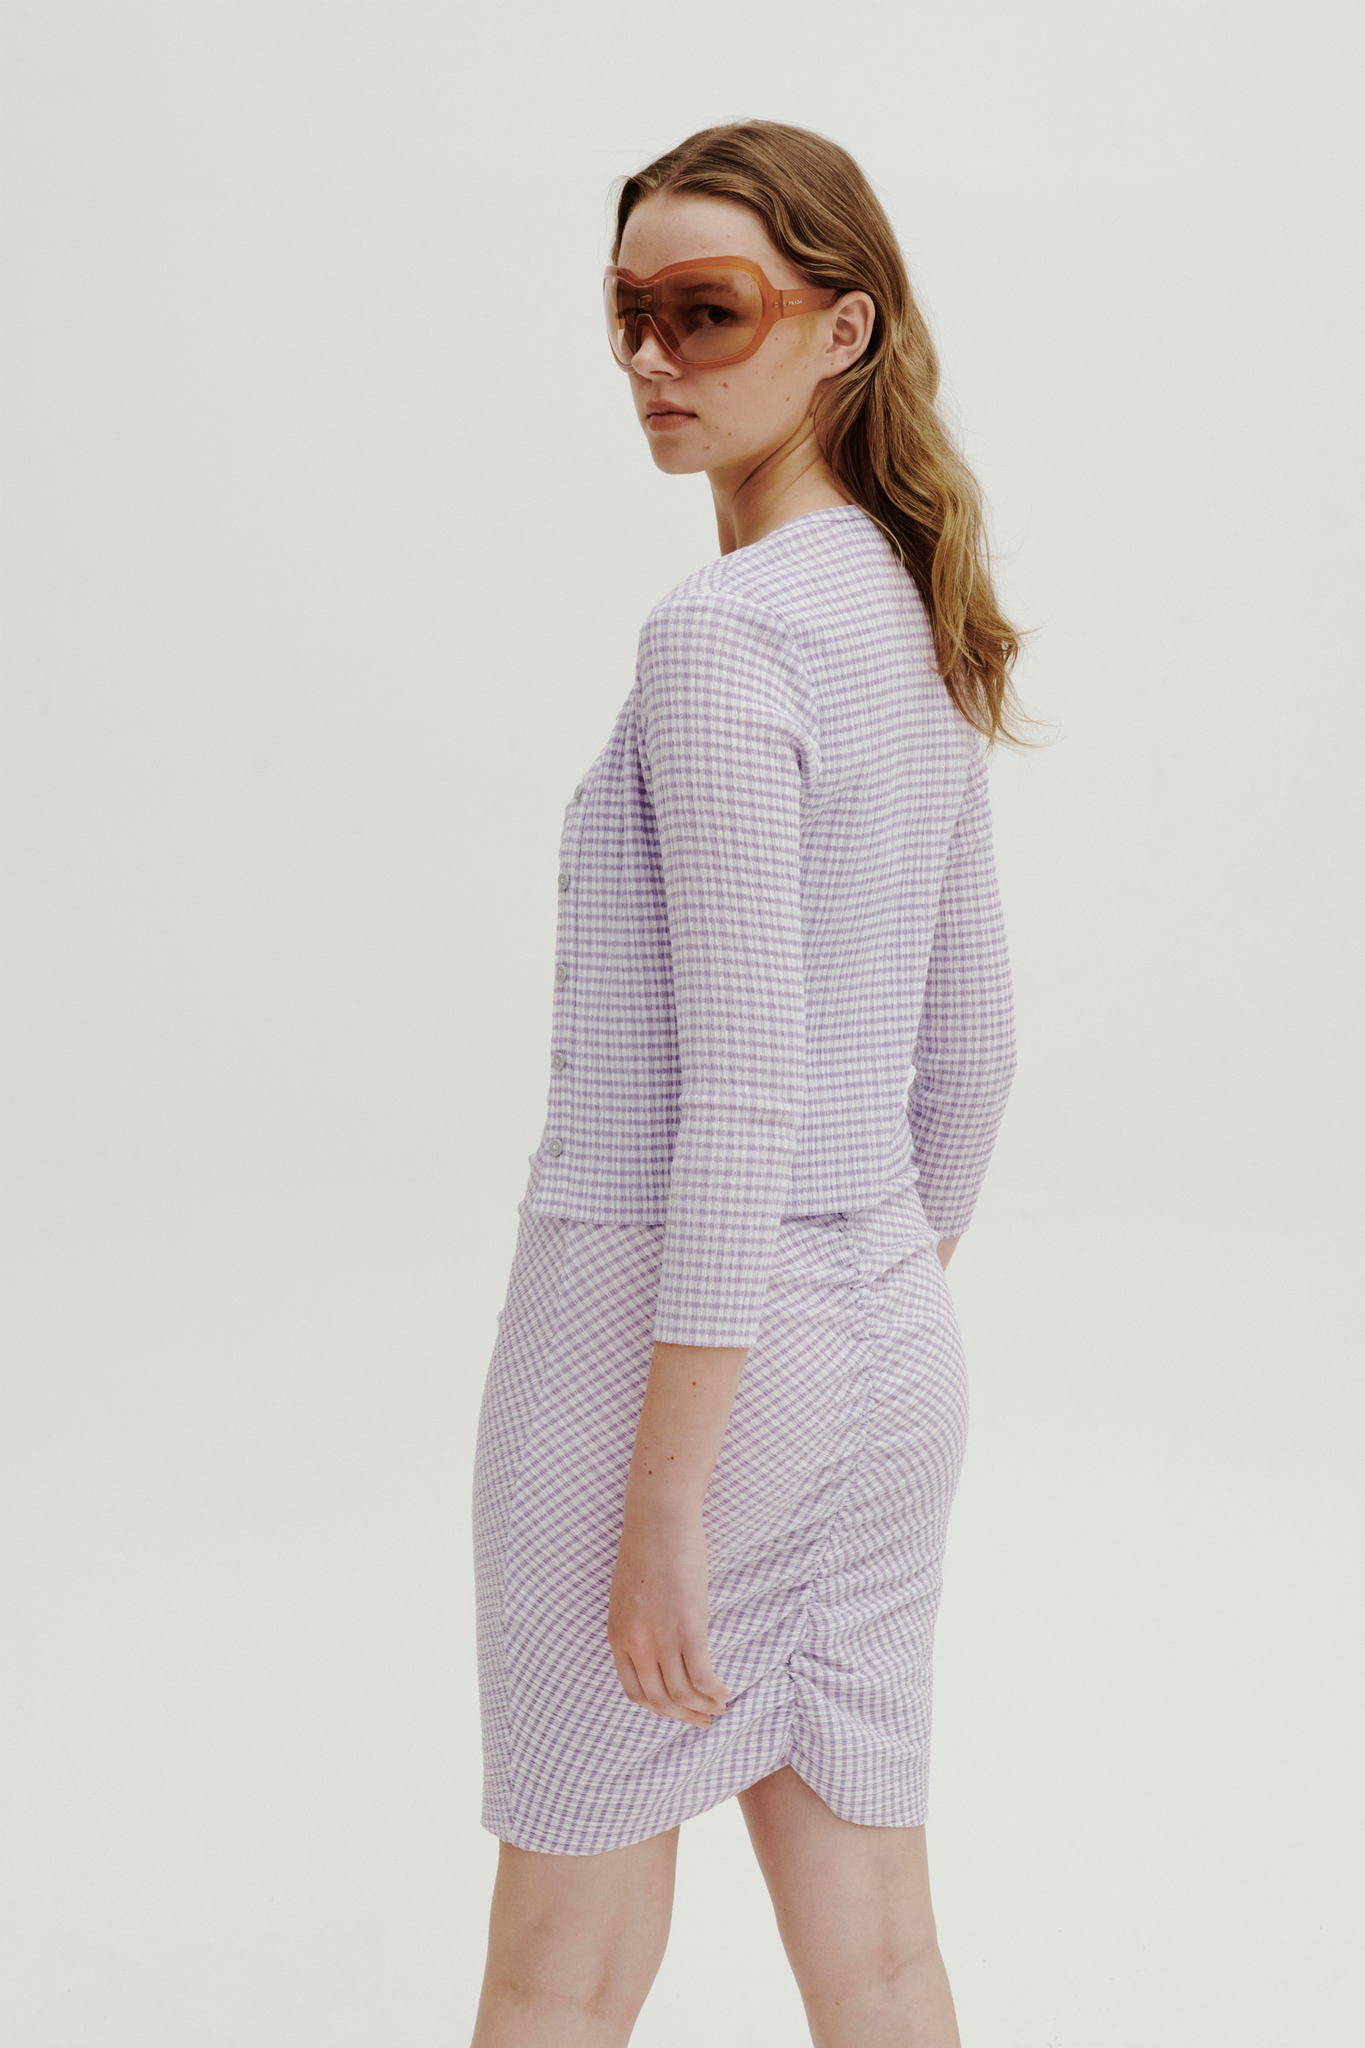 PERMANENT VACATION MOTION CROPPED CARDIGAN - LAVENDER